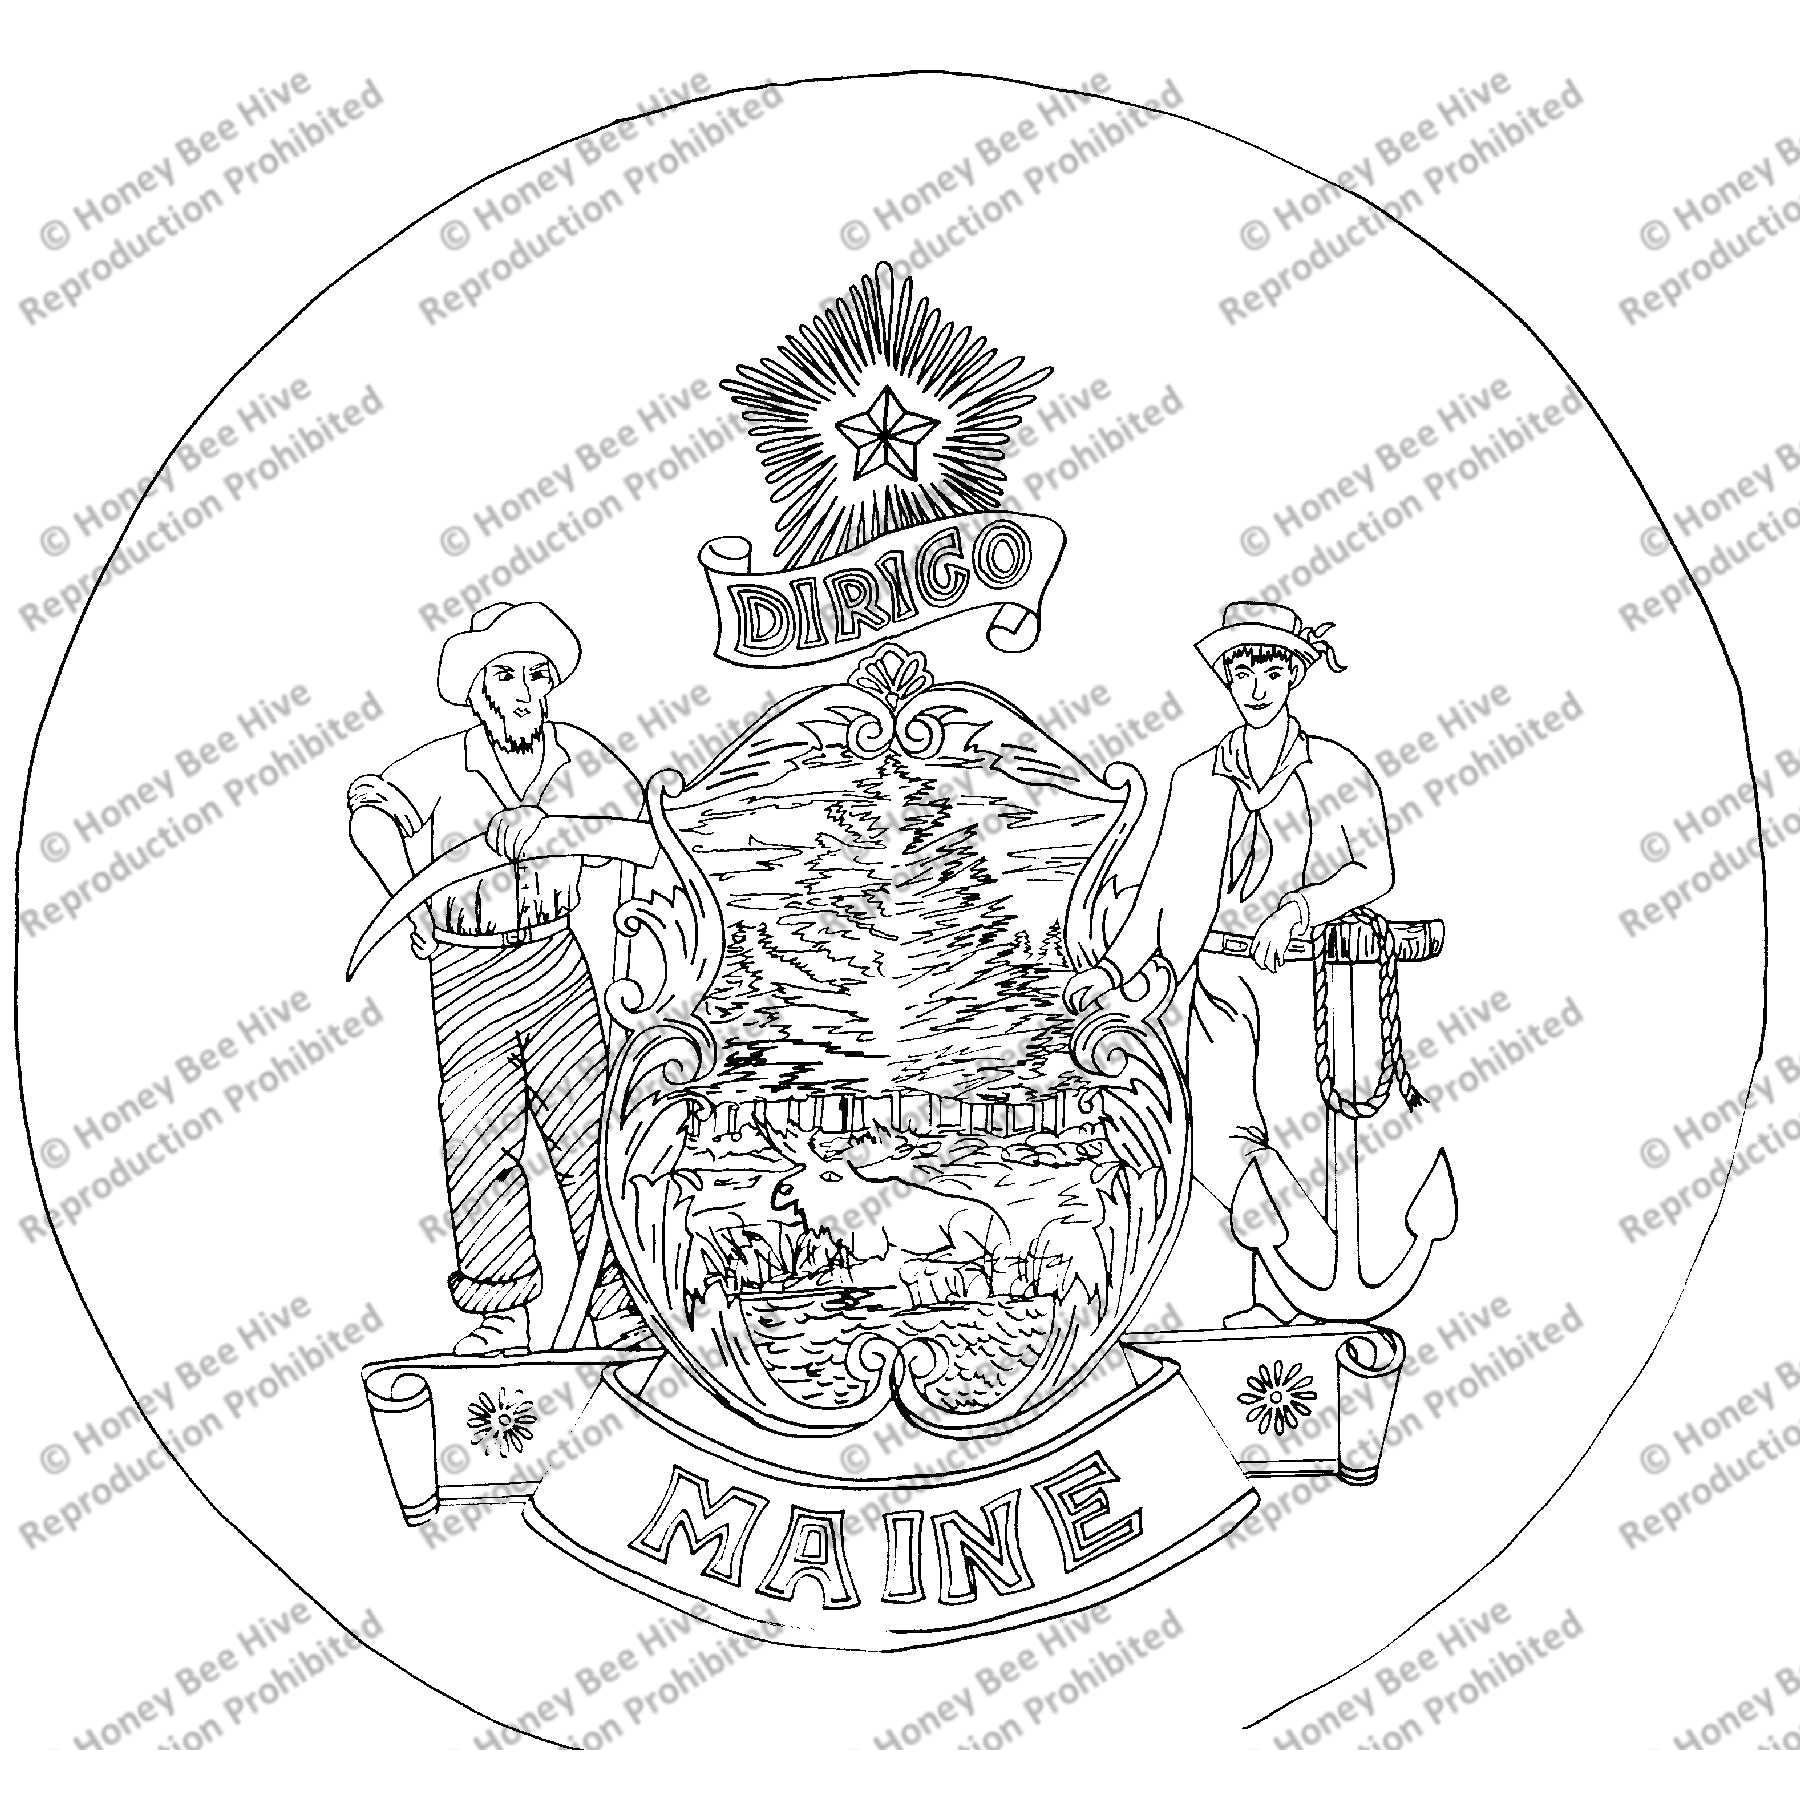 State Seal of Maine for Frank, rug hooking pattern